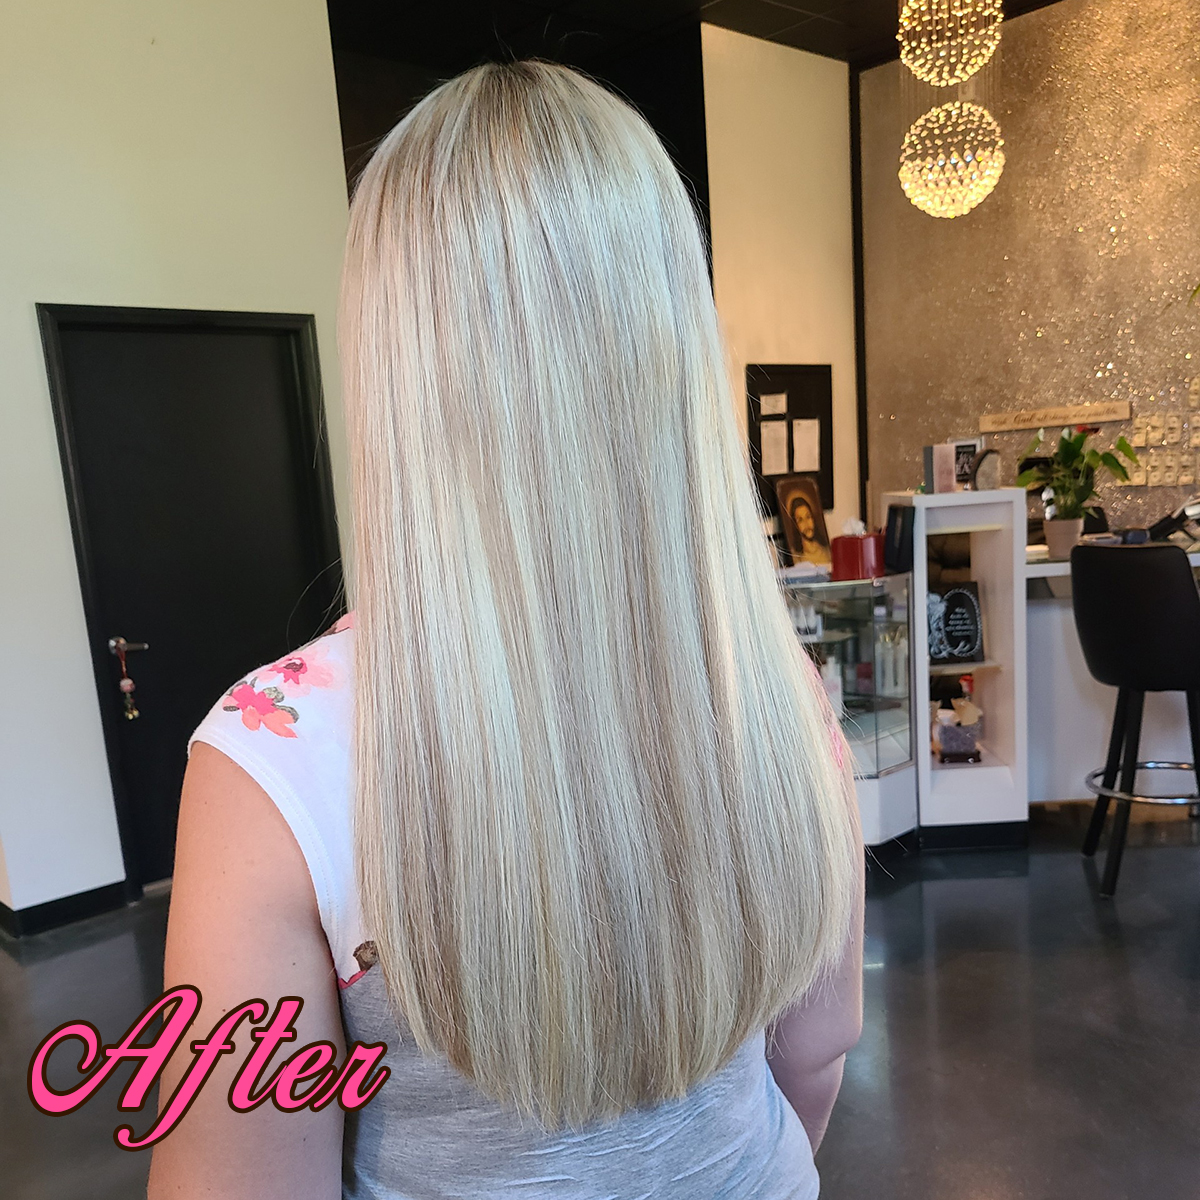 Gallery After 101 - Hair Extensions by Gricelda